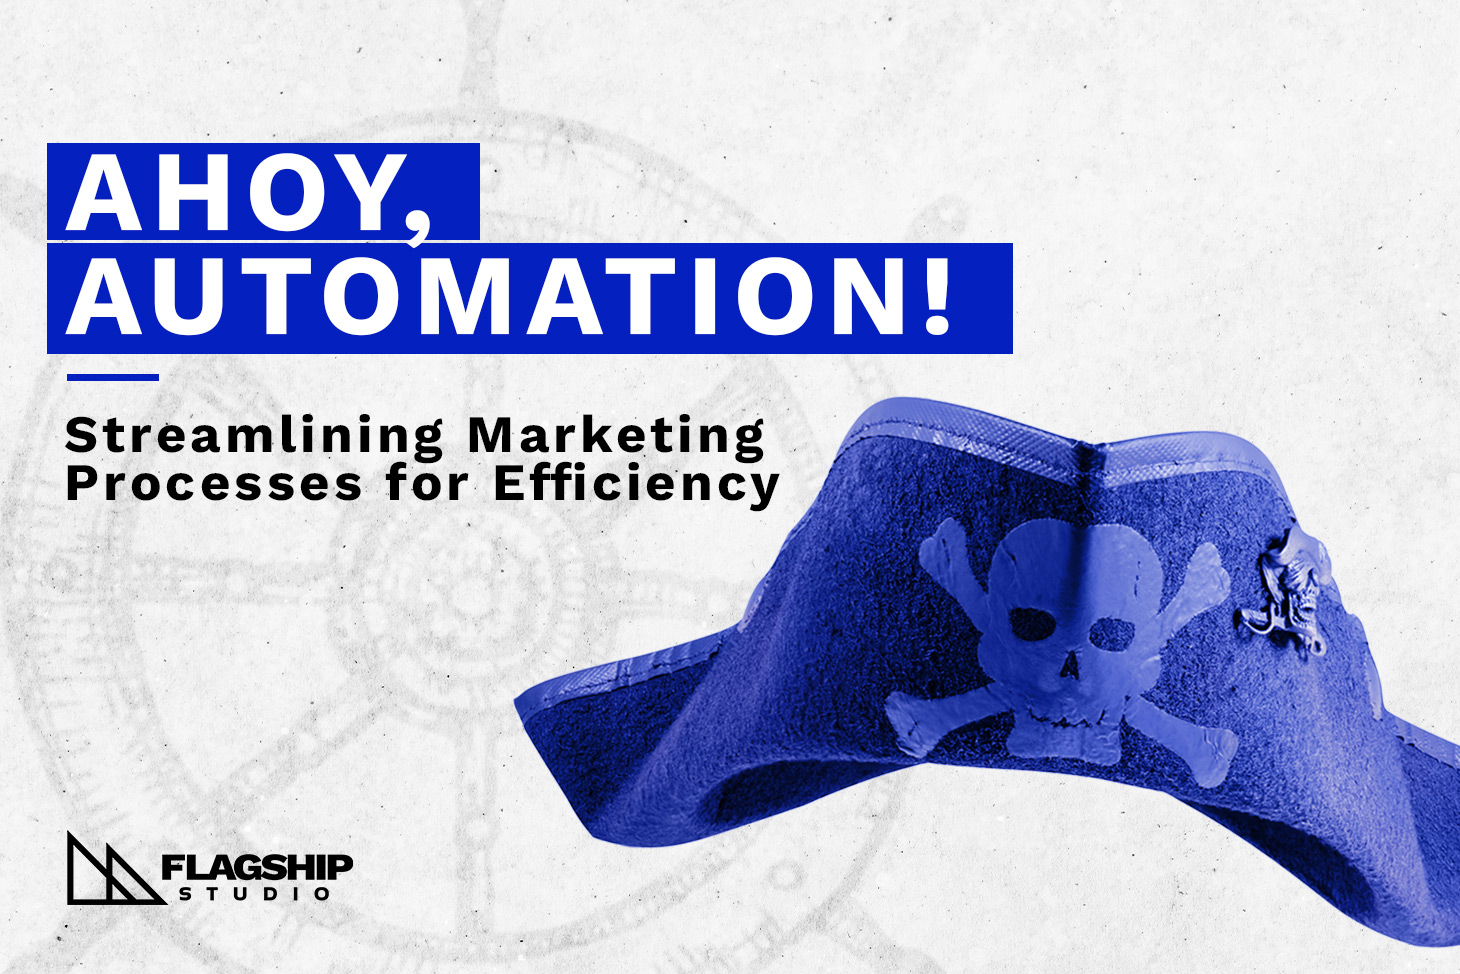 Ahoy, Automation! Streamlining Marketing Processes for Efficiency